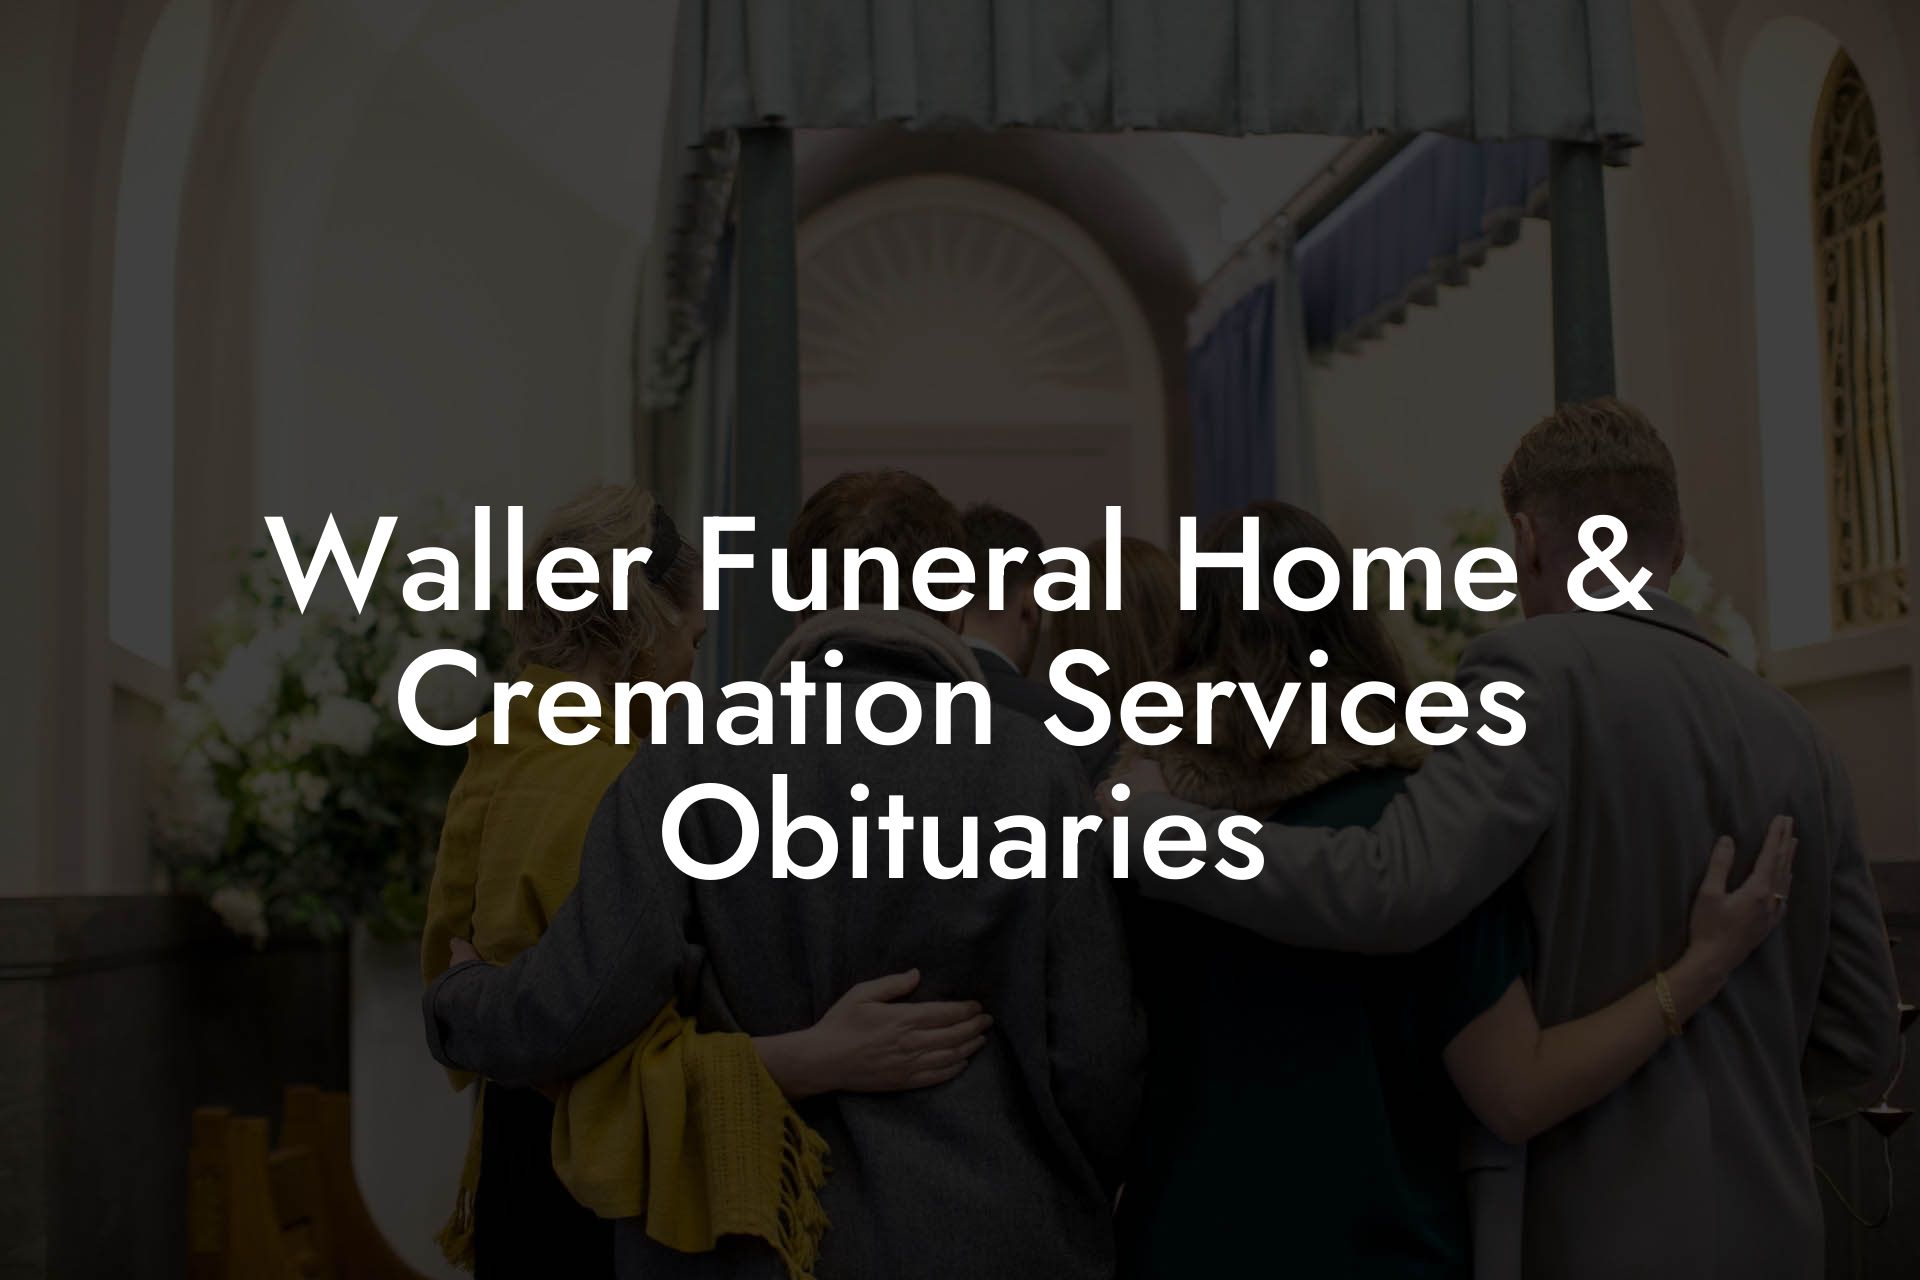 Waller Funeral Home & Cremation Services Obituaries